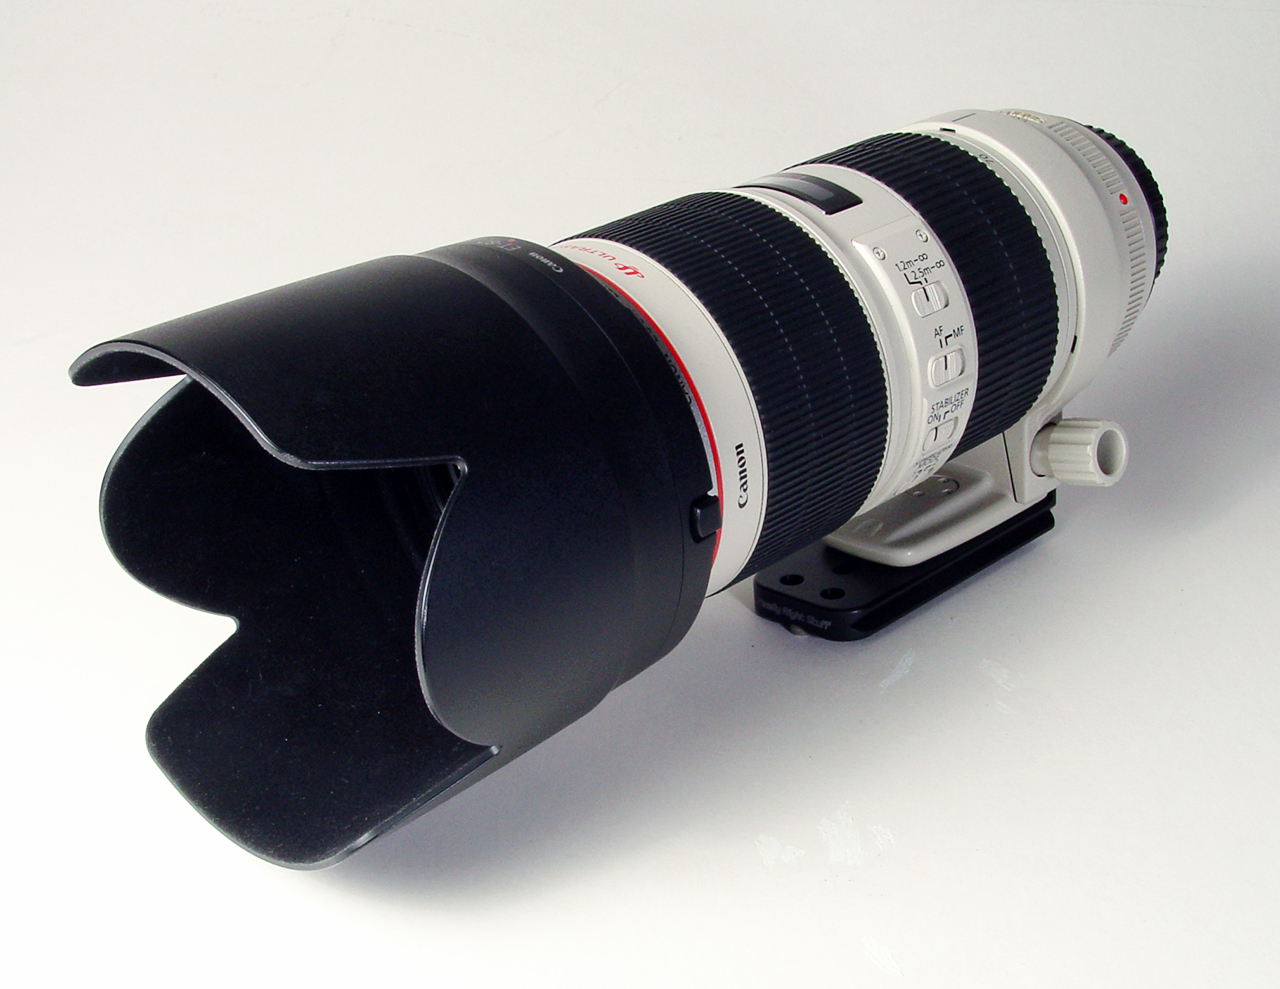 Click to Enlarge - Canon EF 70-200mm f/2.8L IS II USM with hood